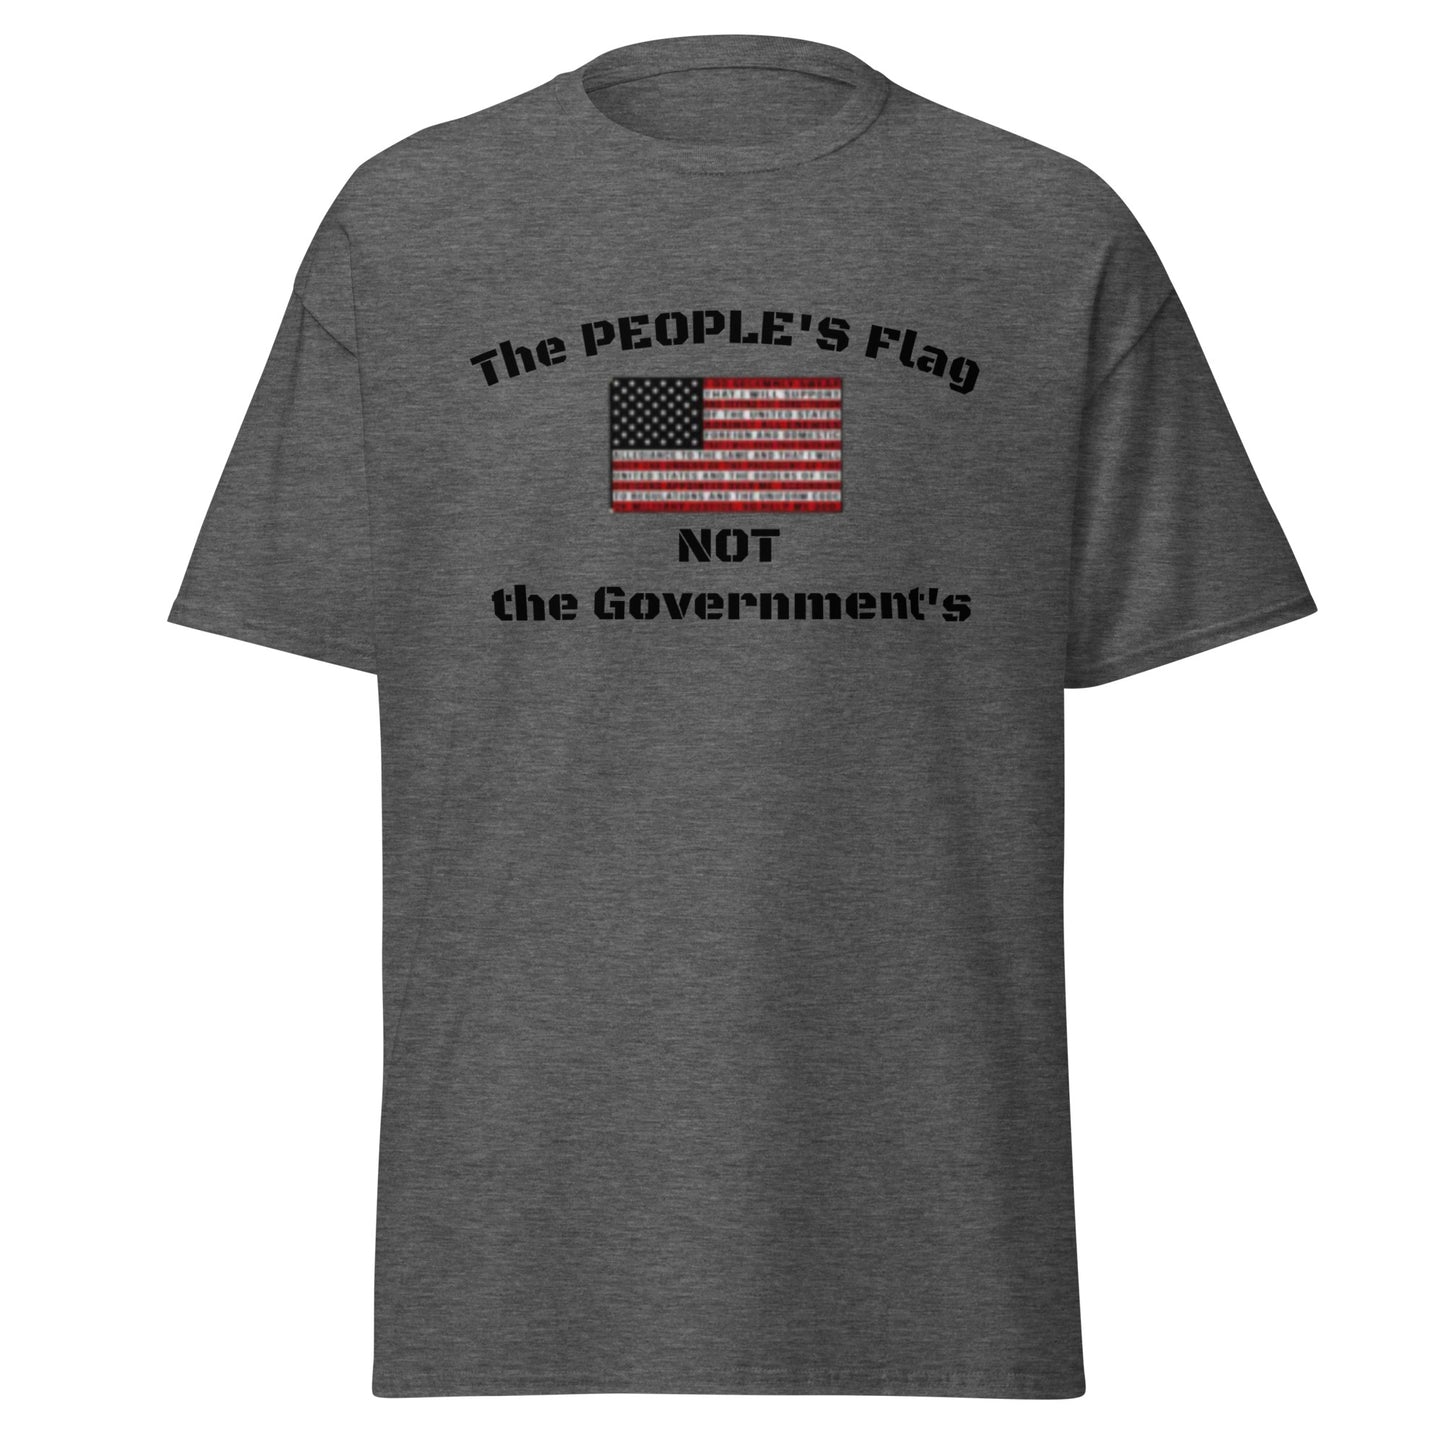 The PEOPLE'S Flag, NOT the Government's classic tee